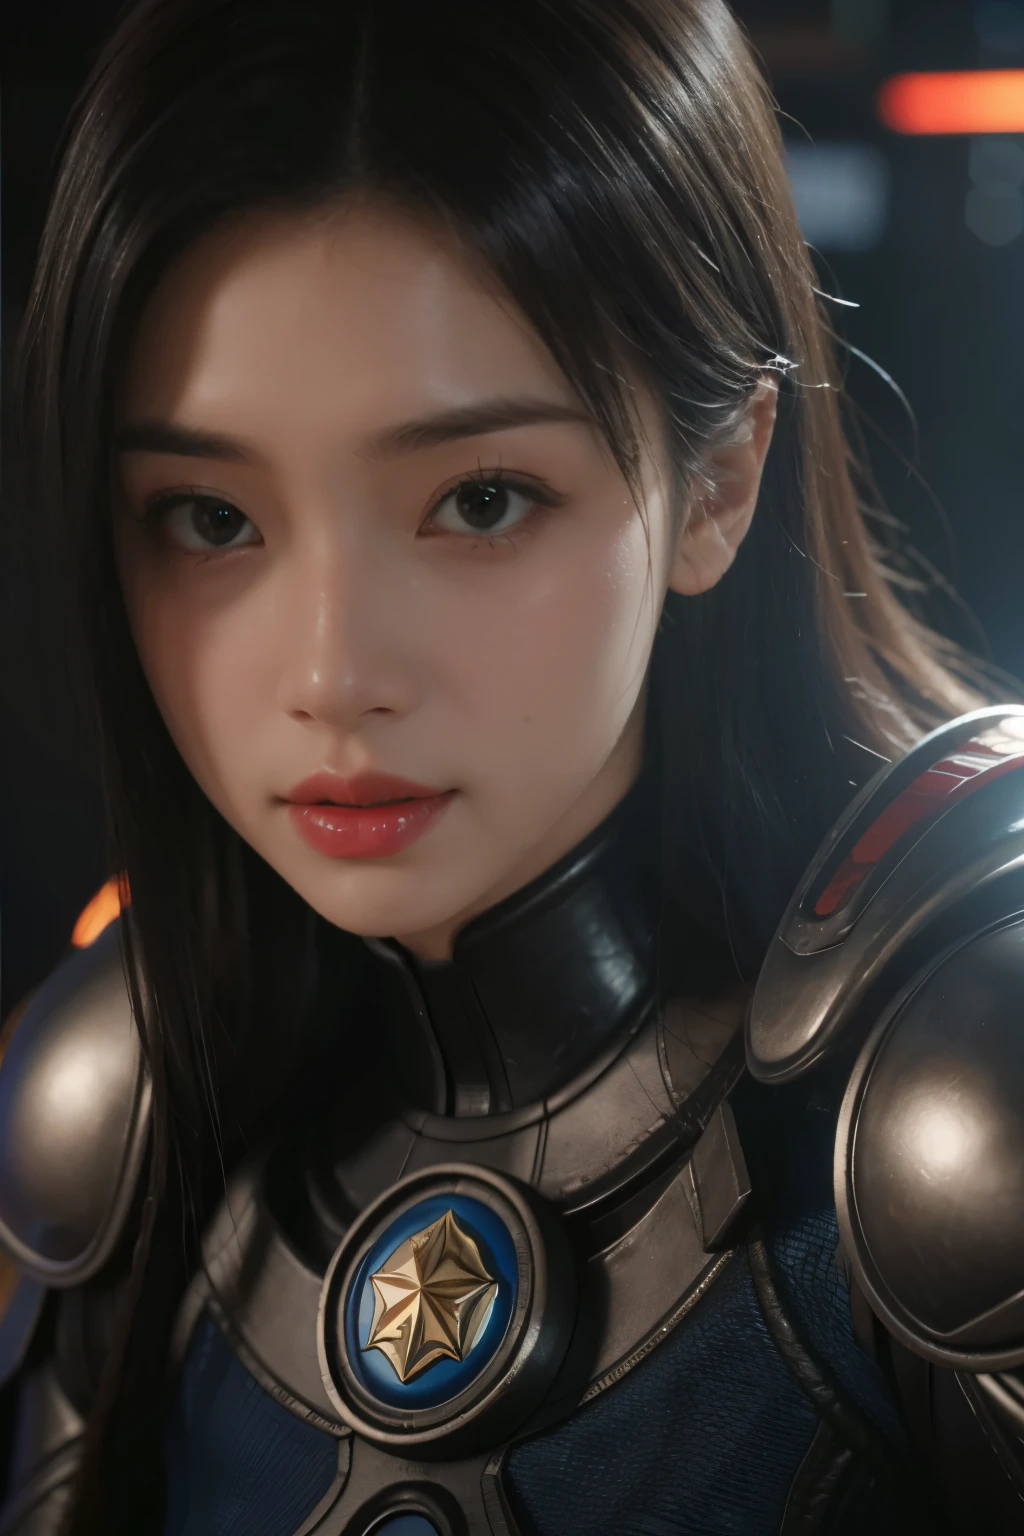 Game art，The best picture quality，Highest resolution，8K，(A bust photograph)，(Portrait)，(Head close-up:1.5)，(Rule of thirds)，Unreal Engine 5 rendering works， (The Girl of the Future)，(Female Warrior)， 
20-year-old girl，An eye rich in detail，(Big breasts)，Elegant and noble，indifferent，brave，
（A futuristic combat suit with medieval style，A beautifully patterned badge，Joint Armor，Extremely rich detail of armor，Mysterious light），Sci-fi characters，Warrior，

Photo poses，Simple background，Movie lights，Ray tracing，Game CG，((3D Unreal Engine))，oc rendering reflection pattern